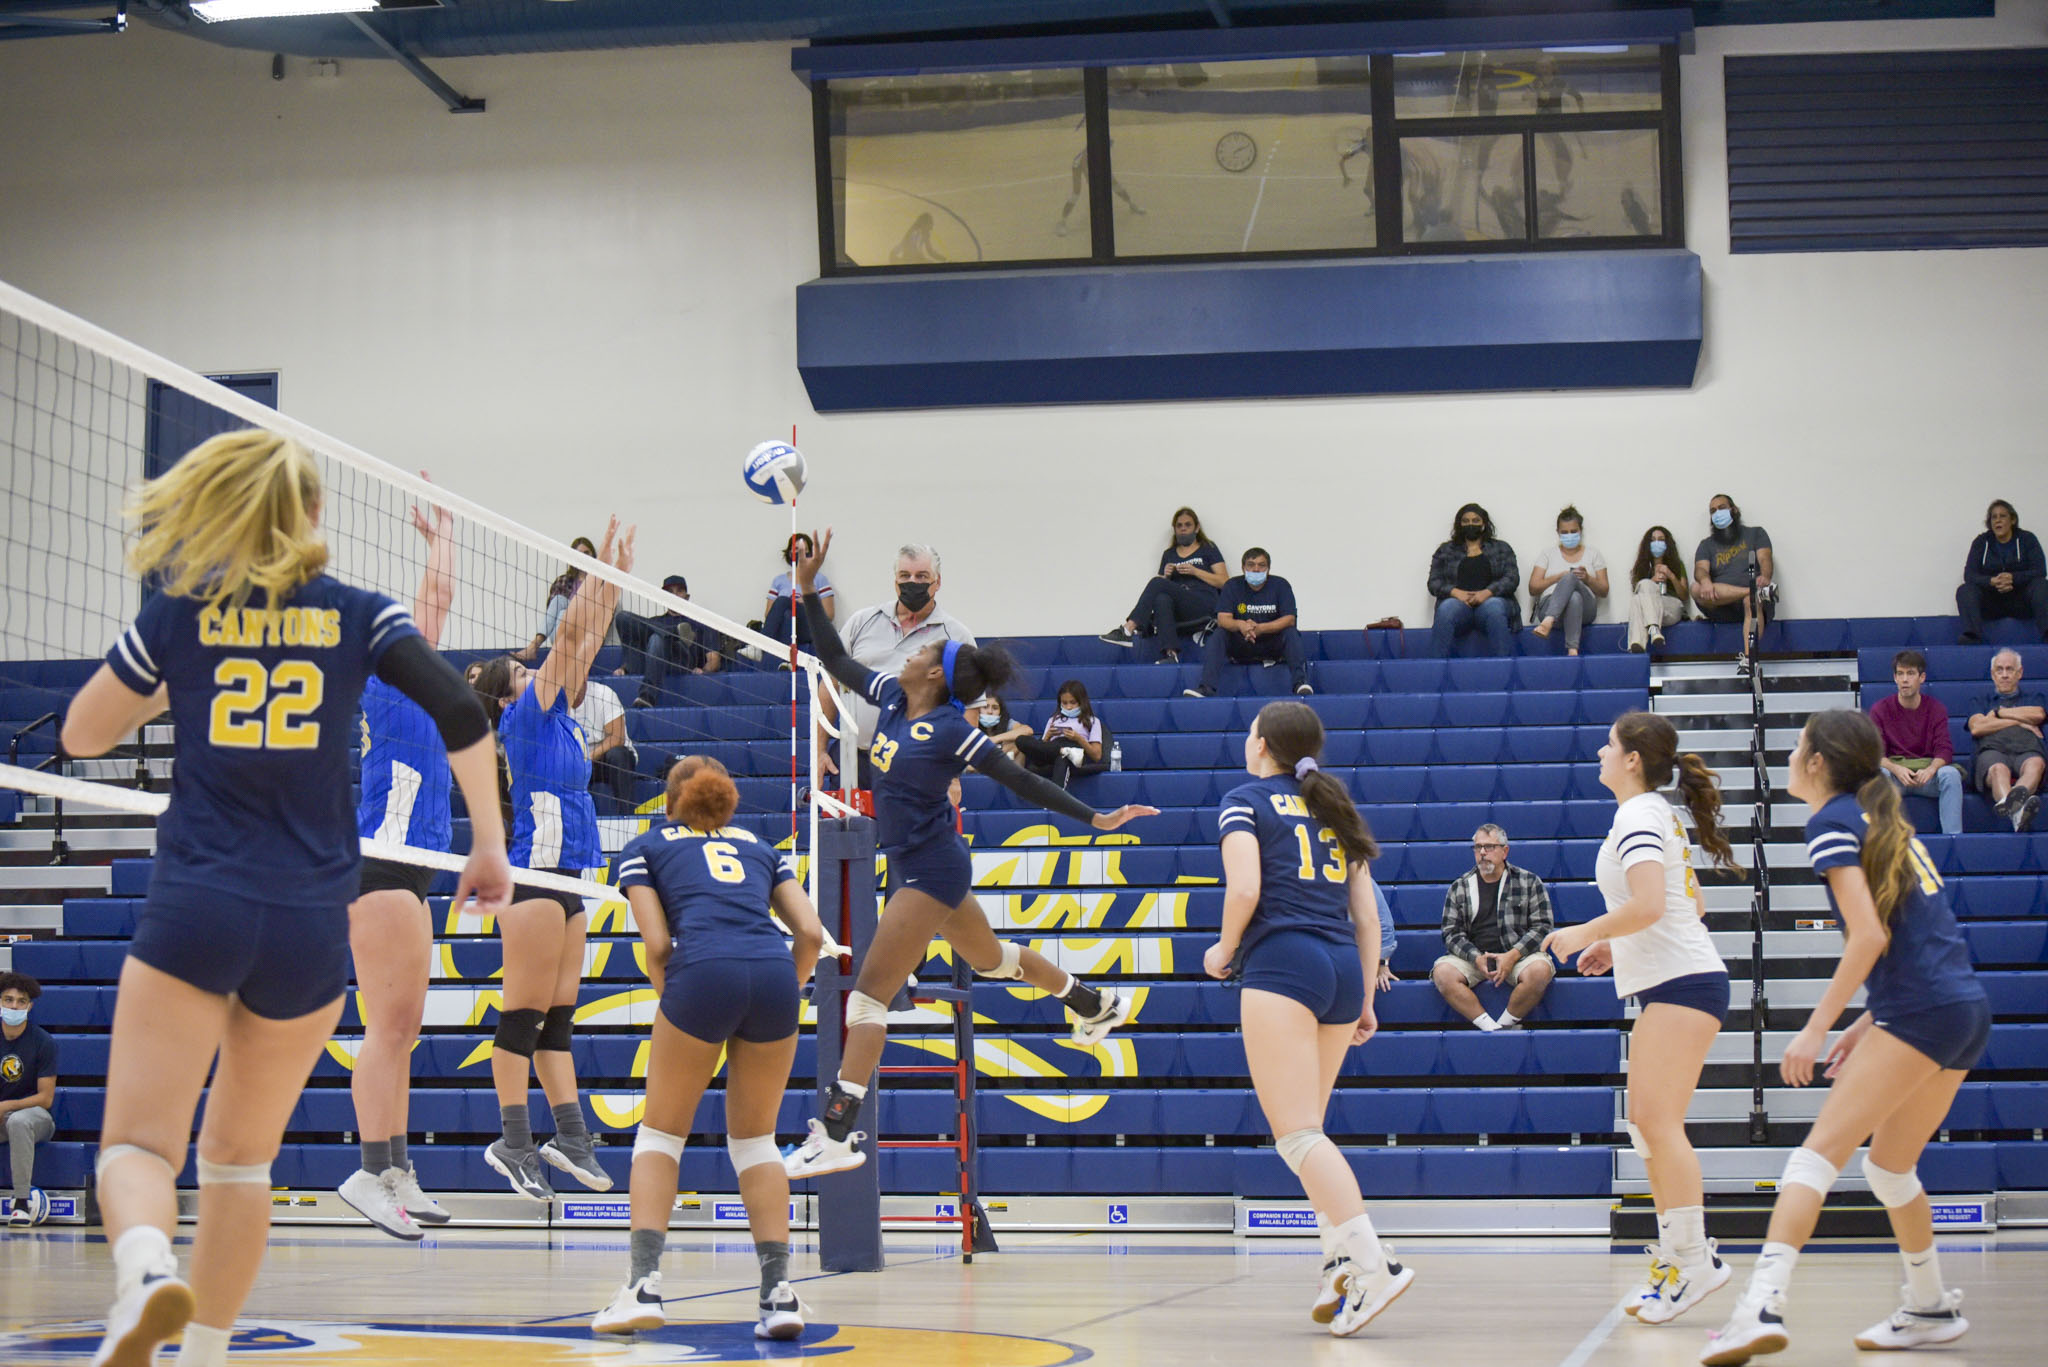 College of the Canyons won its fourth straight match in a 3-0 (25-23, 25-15, 25-11) sweep of West L.A. College on Friday at the Cougar Cage. COC has lost just two matches dating back to Oct. 13. — Mari Kneisel/COC Sports Information